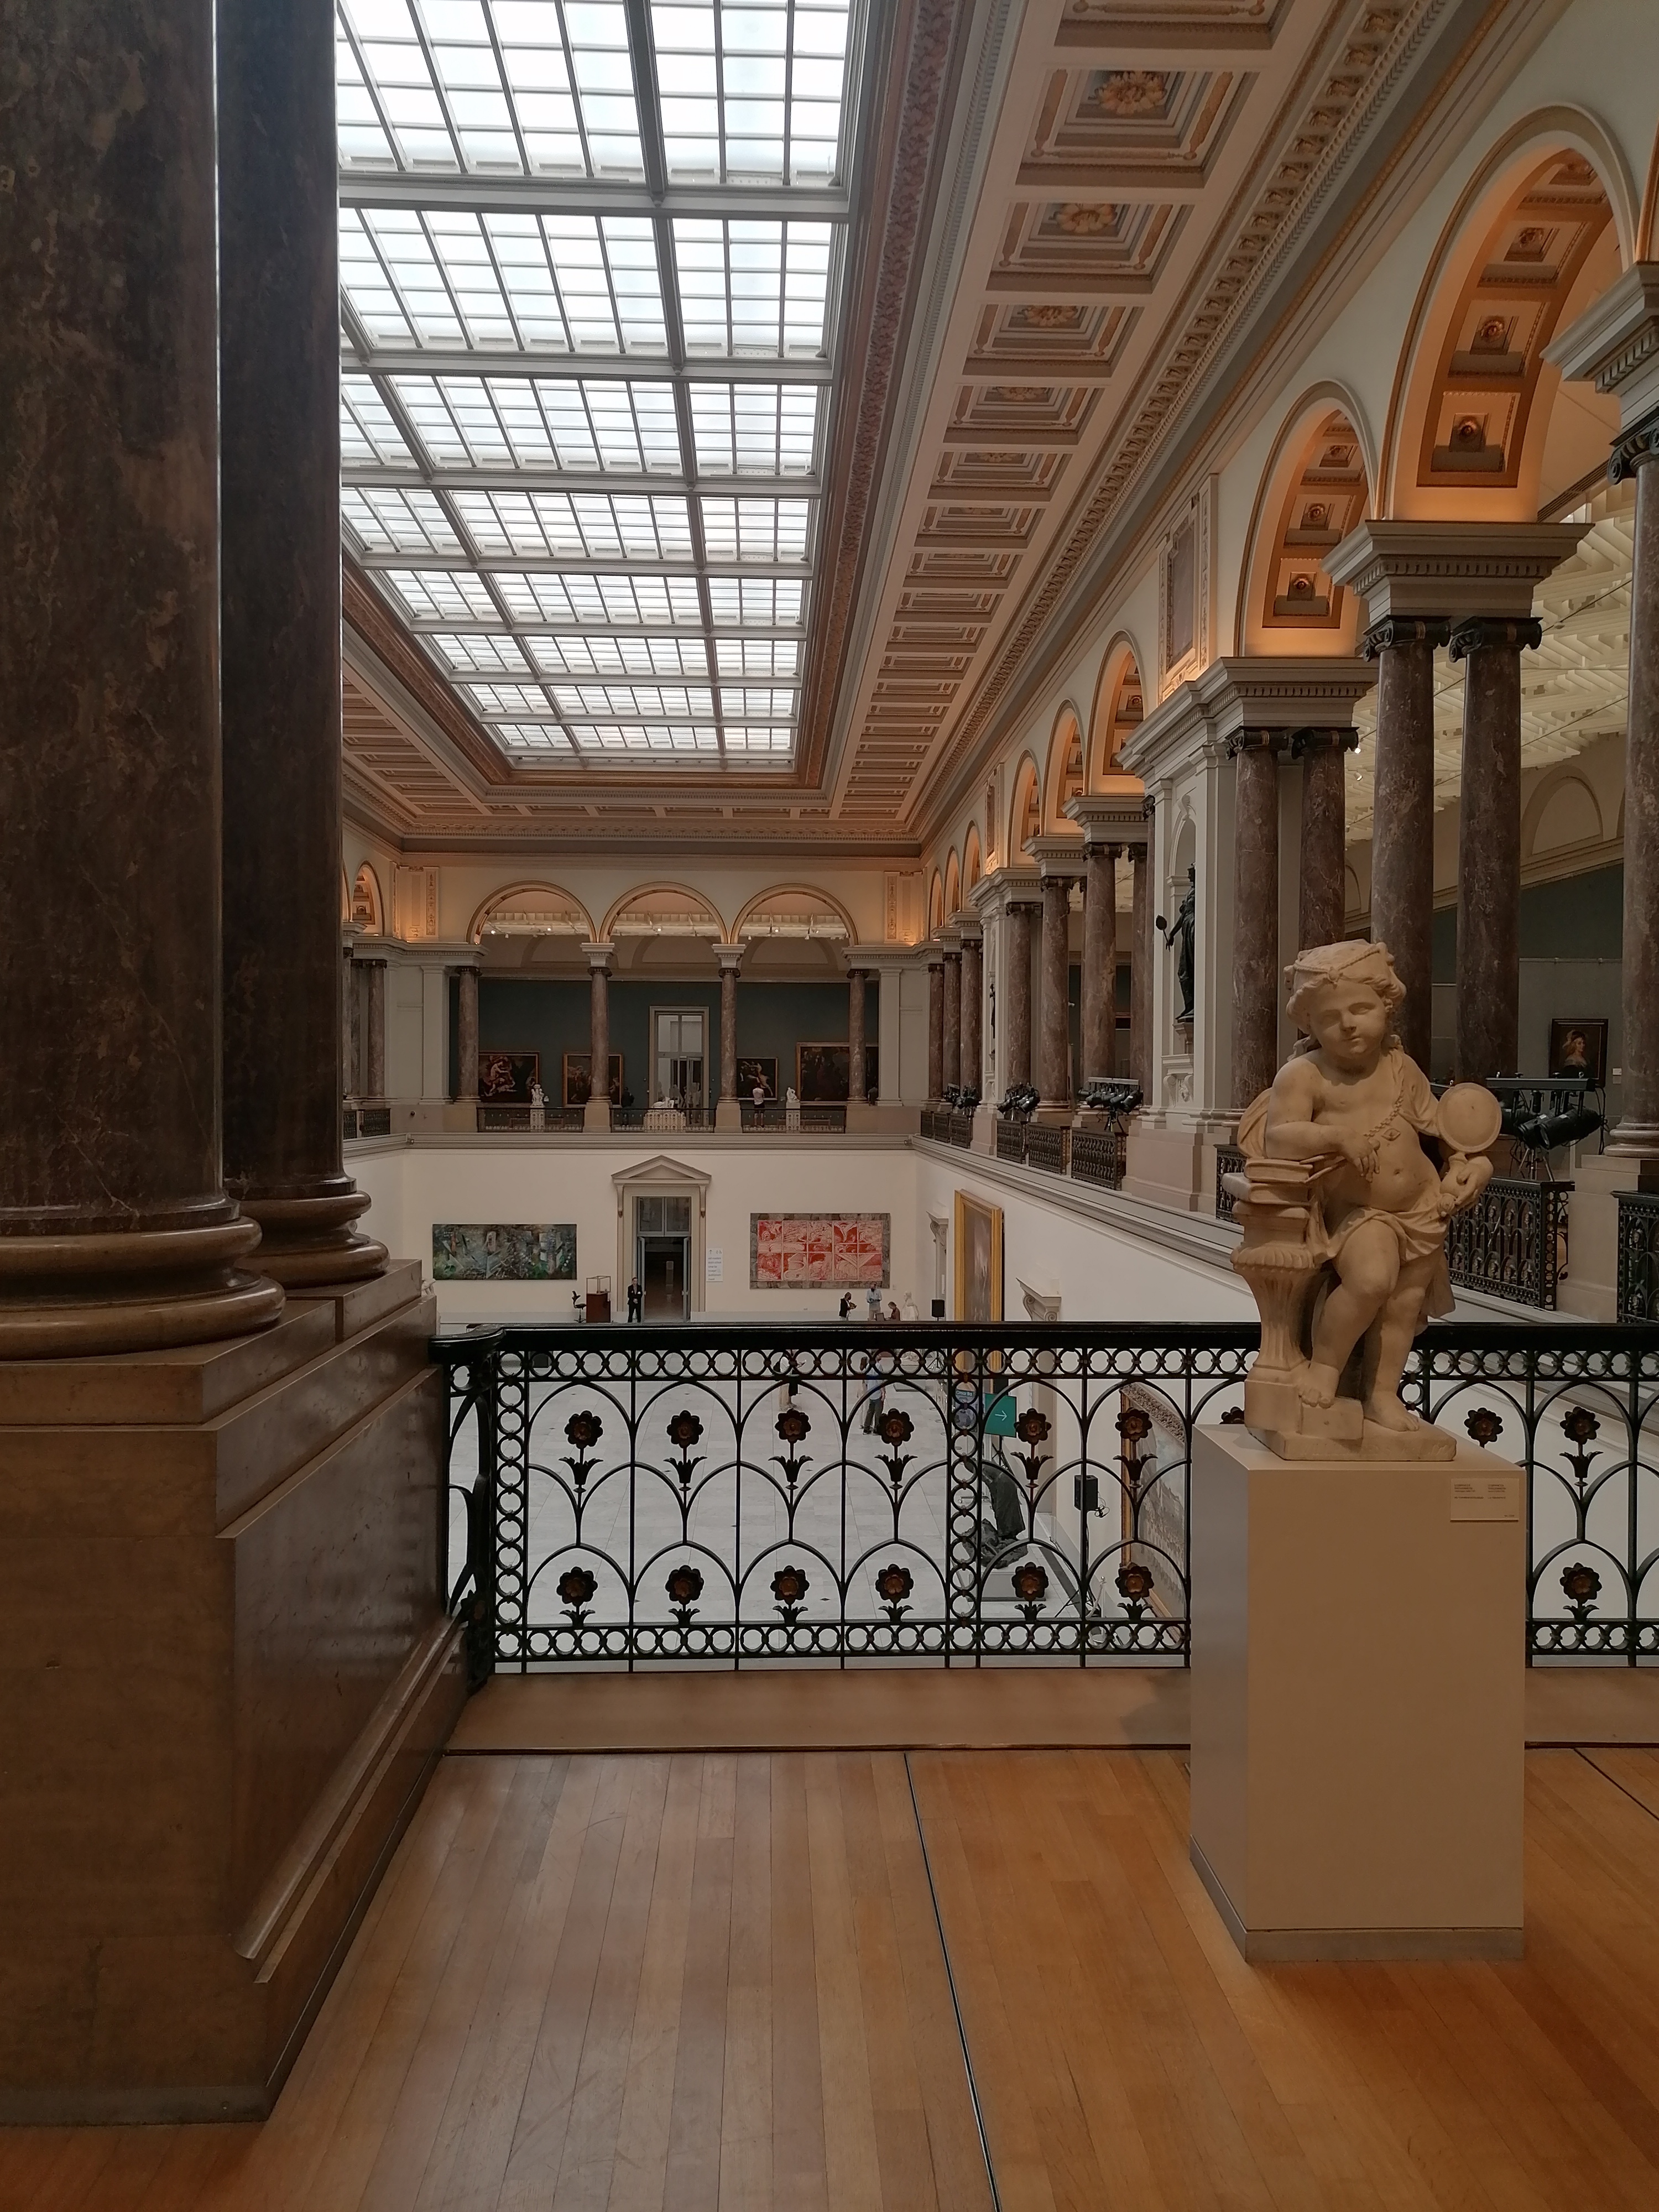 View of the inside of The Royal Museum of fine Arts